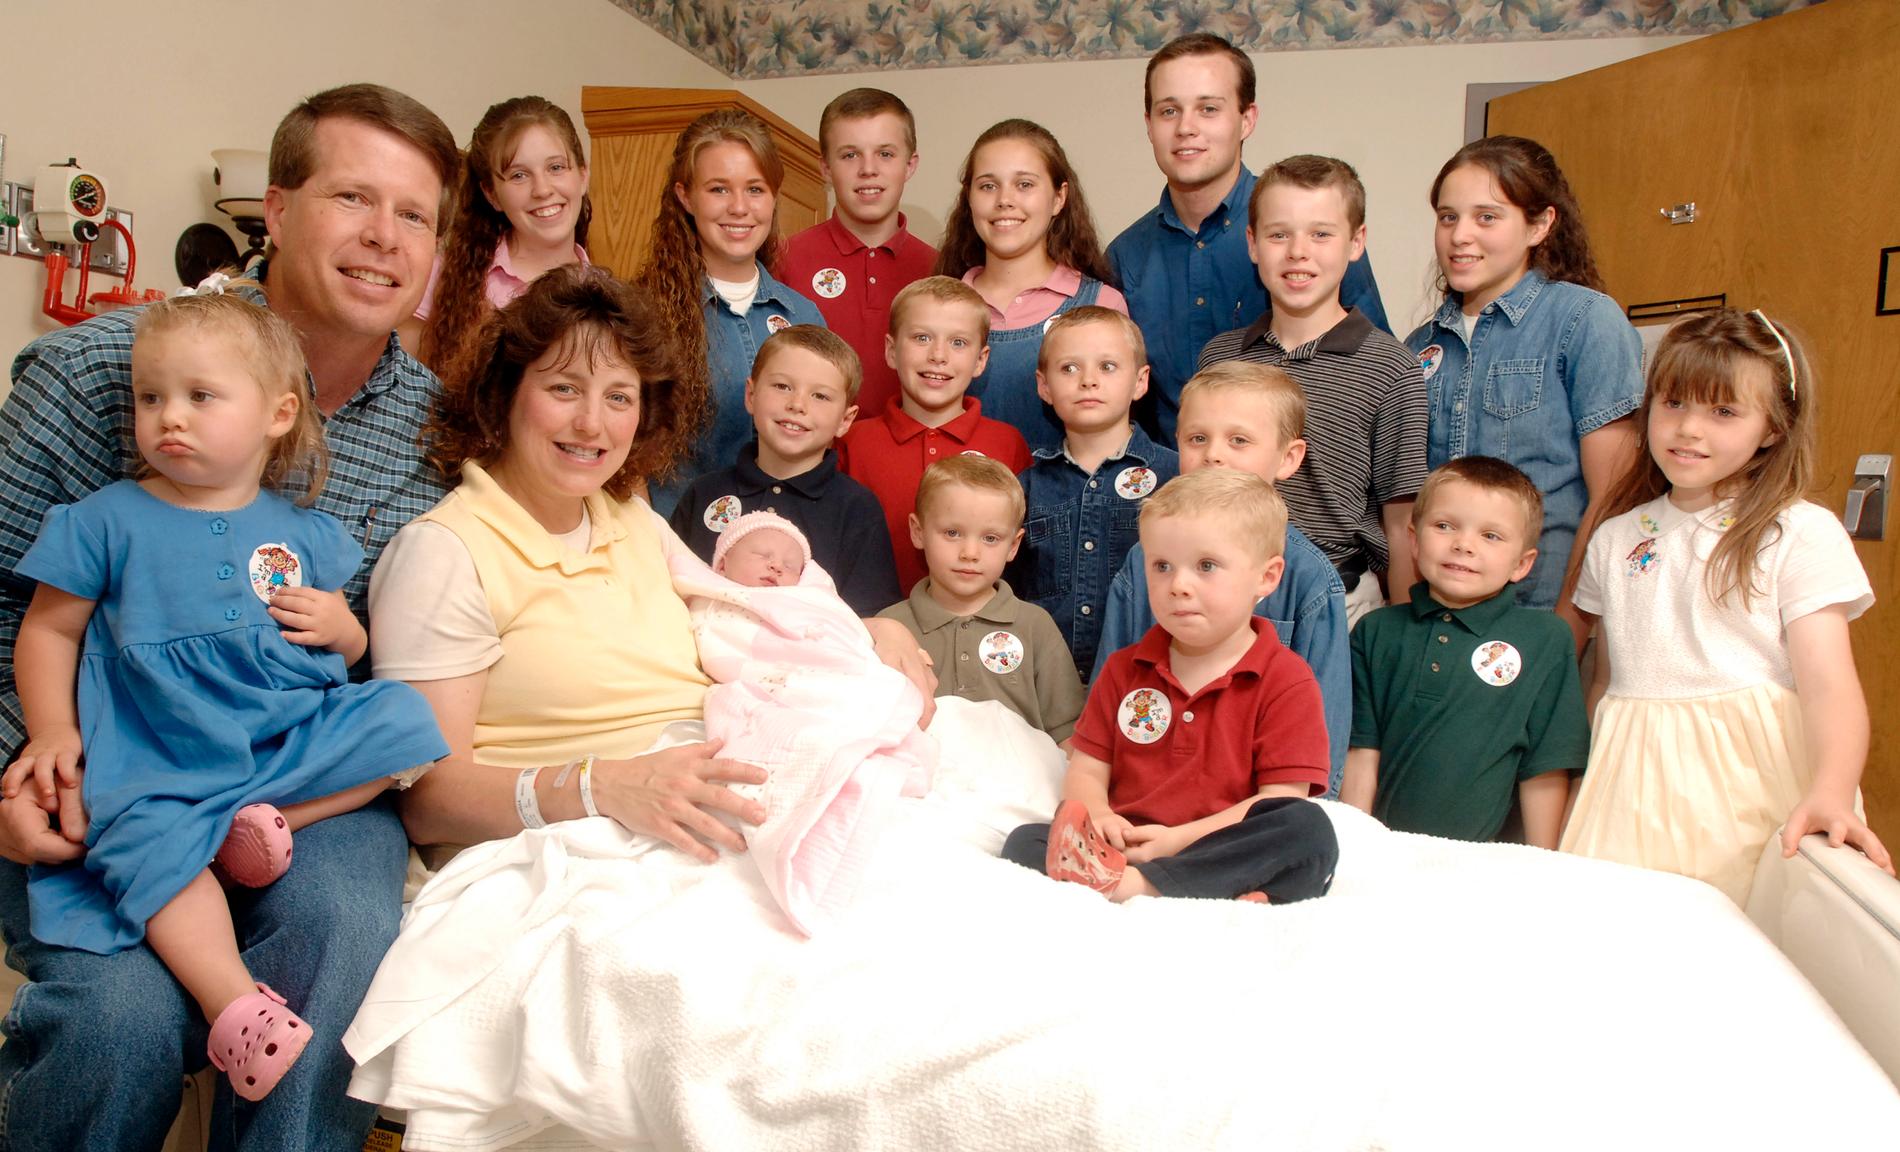 ”19 kids and counting”.